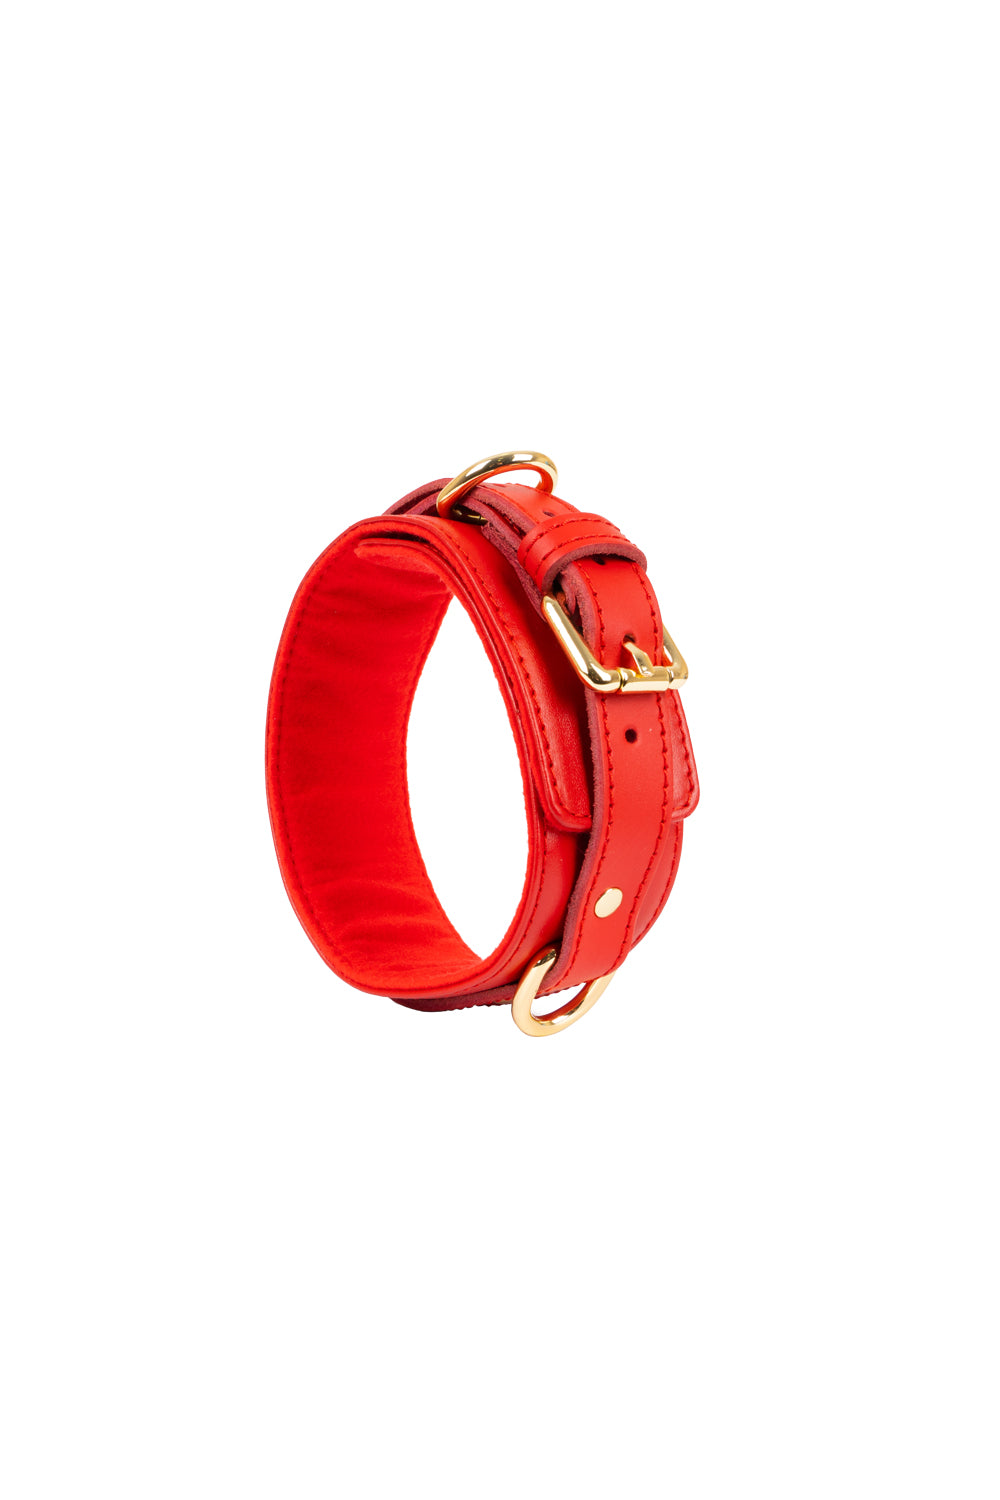 Leather Choker. Red